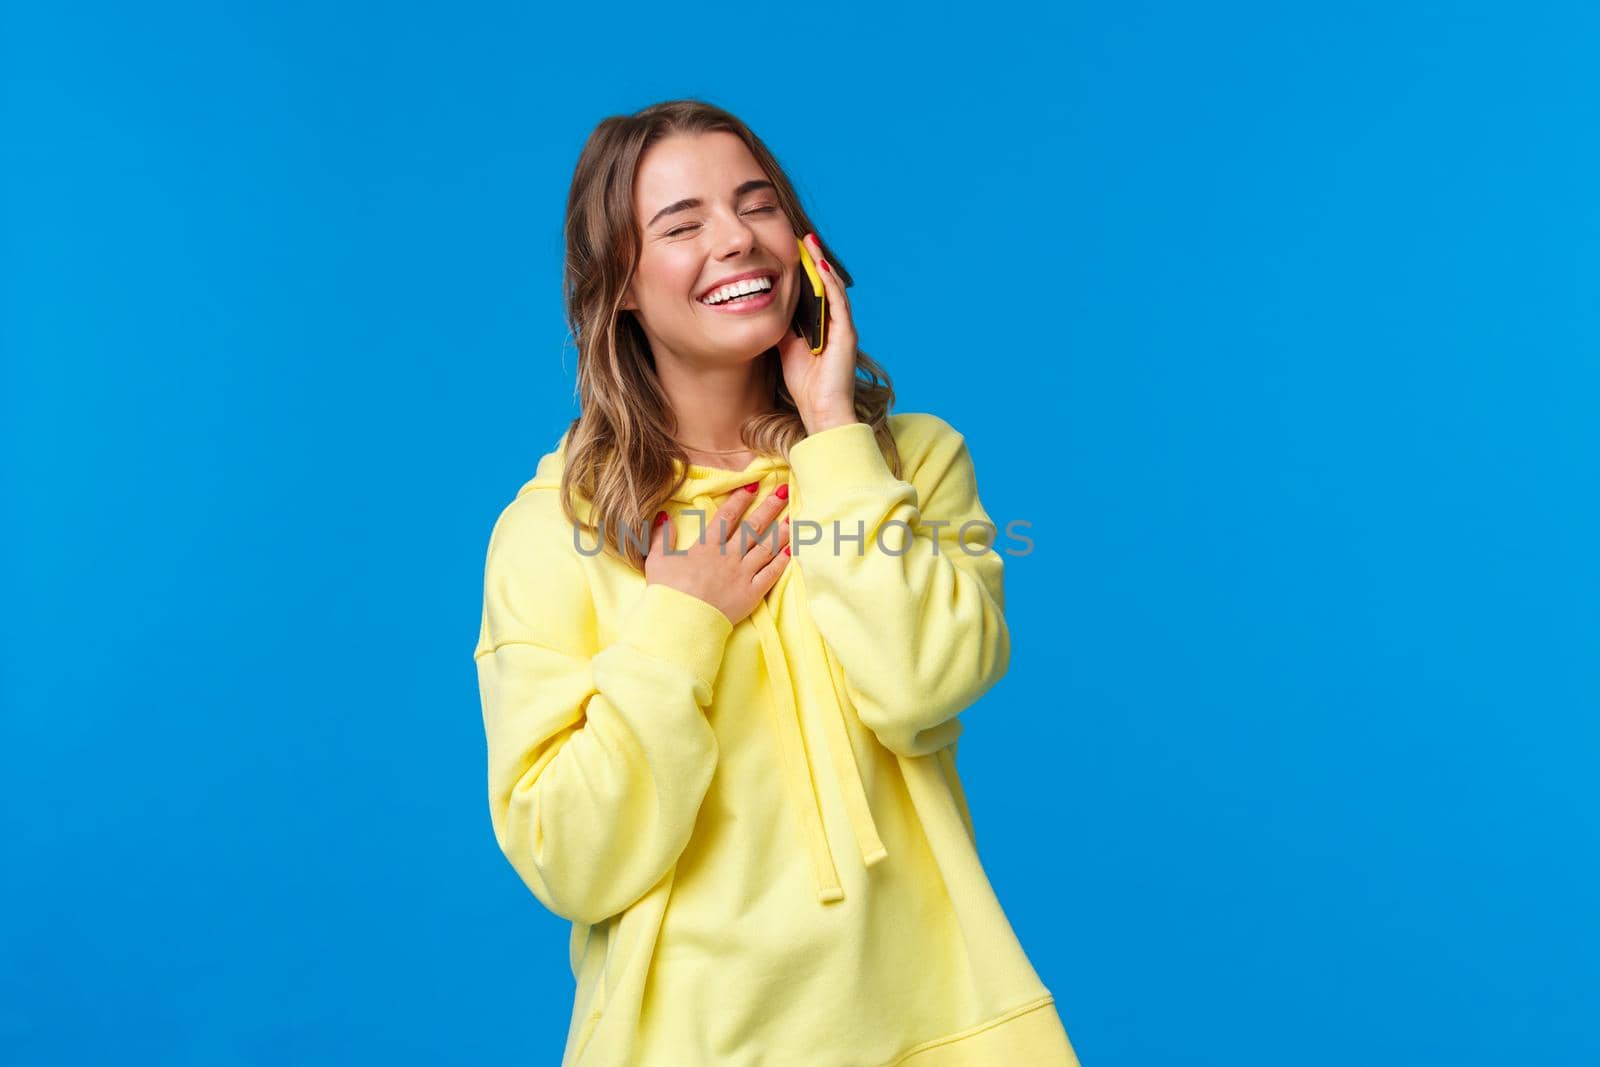 Waist-up portrait of joyful smiling young woman having funny conversation on phone, holding smartphone near ear, close eyes and laughing as touch chest, standing blue background.